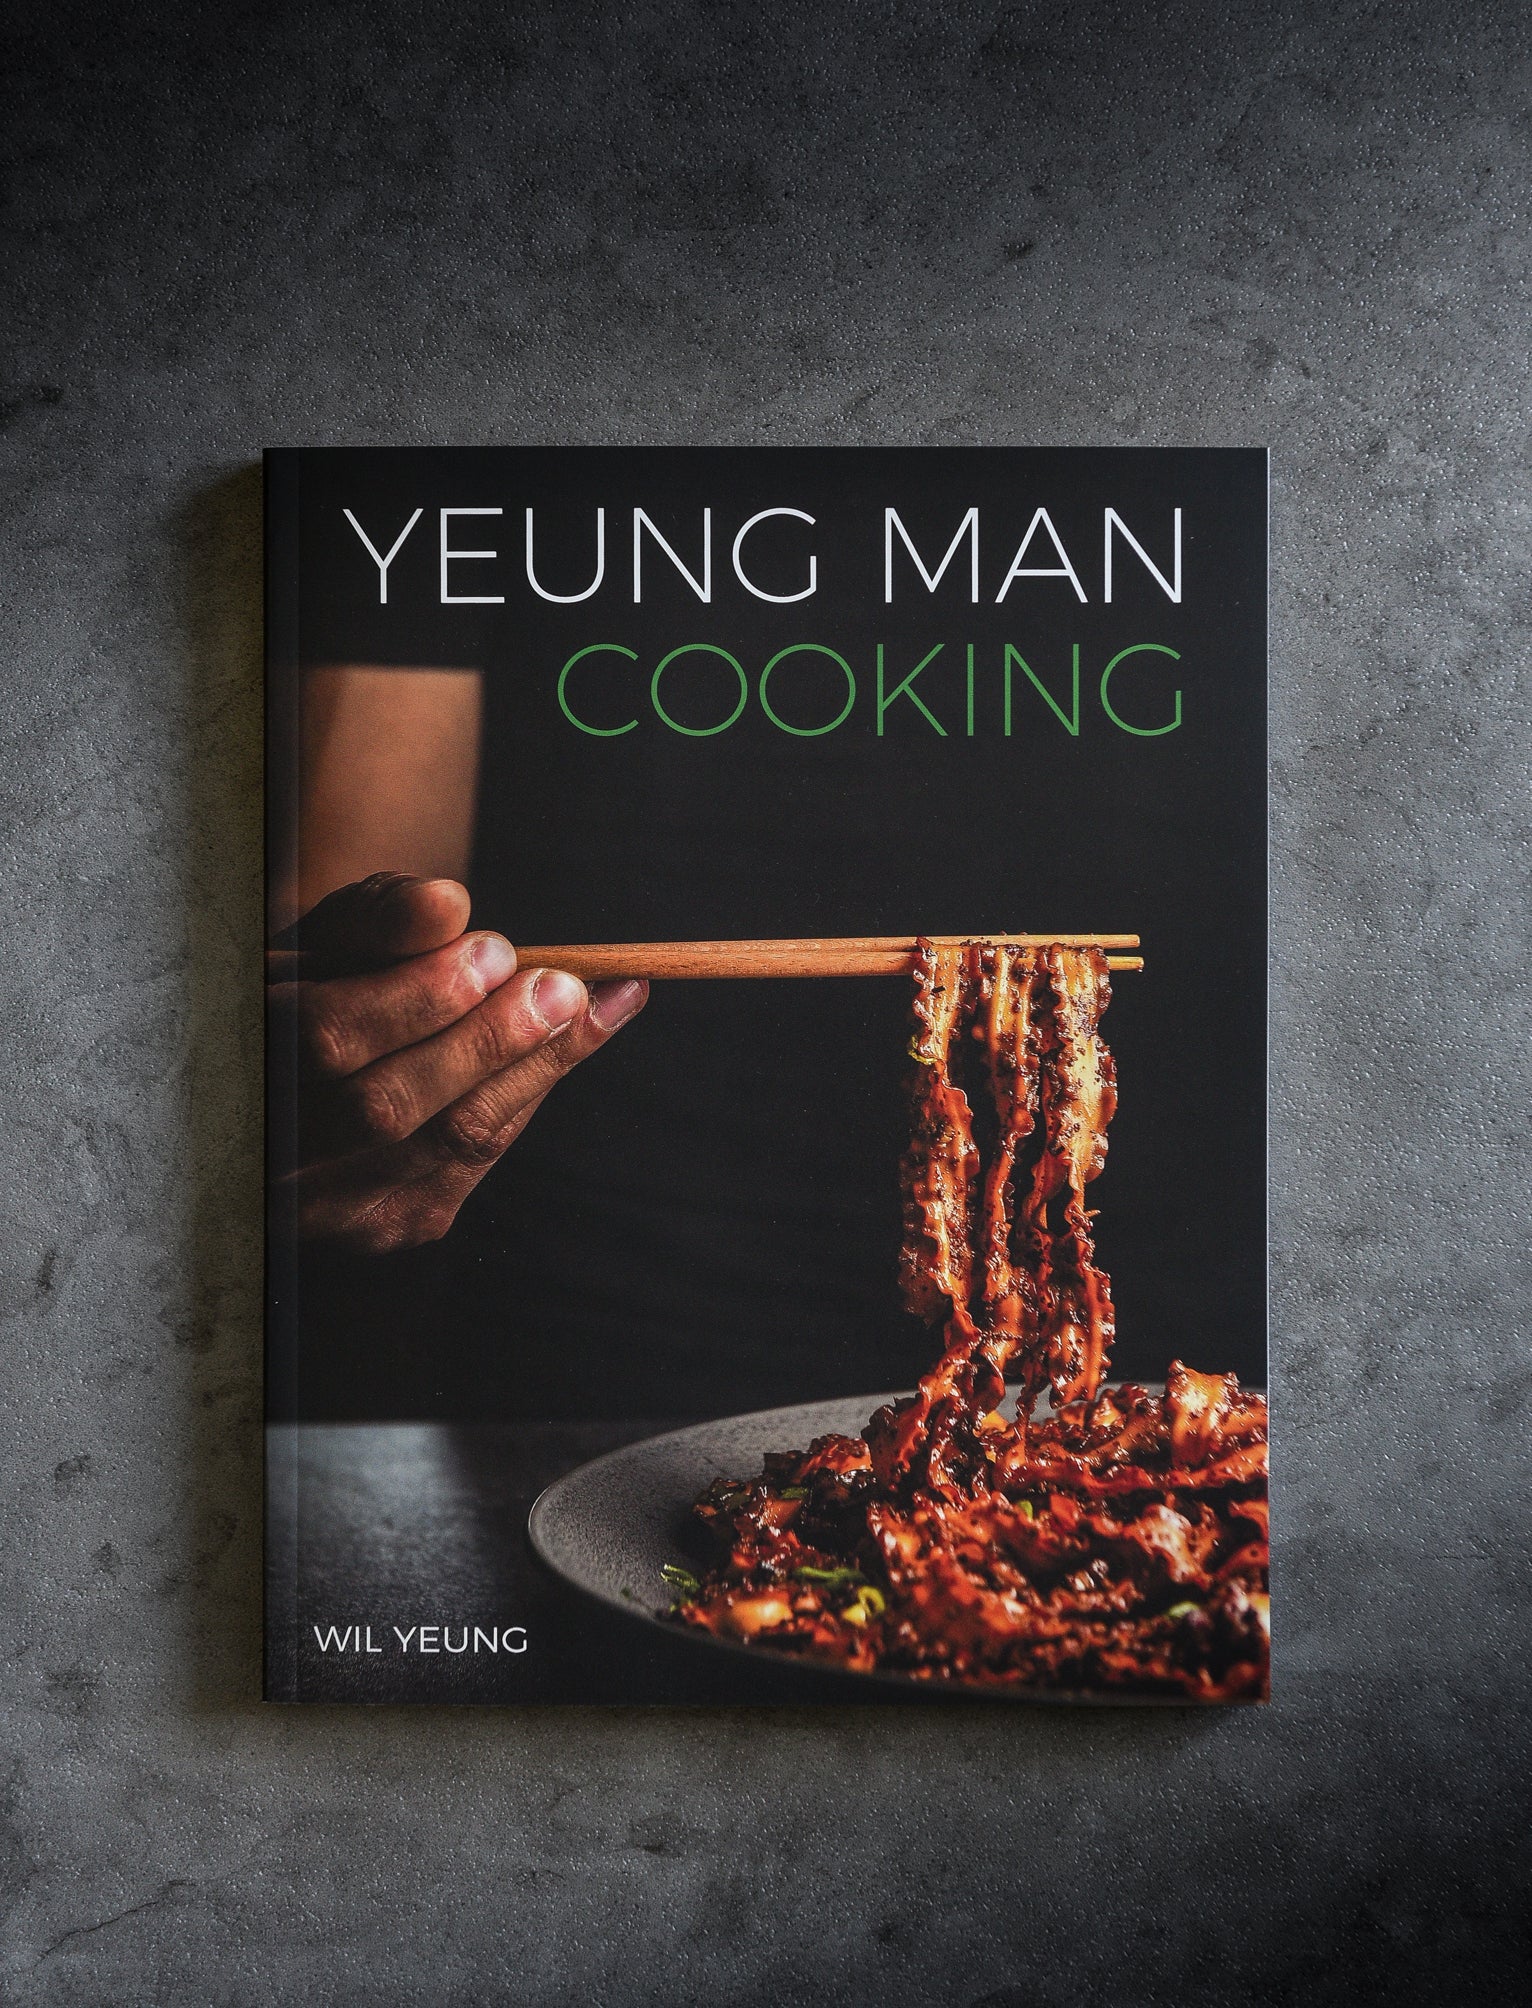 Yeung Man Cooking SPICE CONTAINERS – YEUNG MAN COOKING